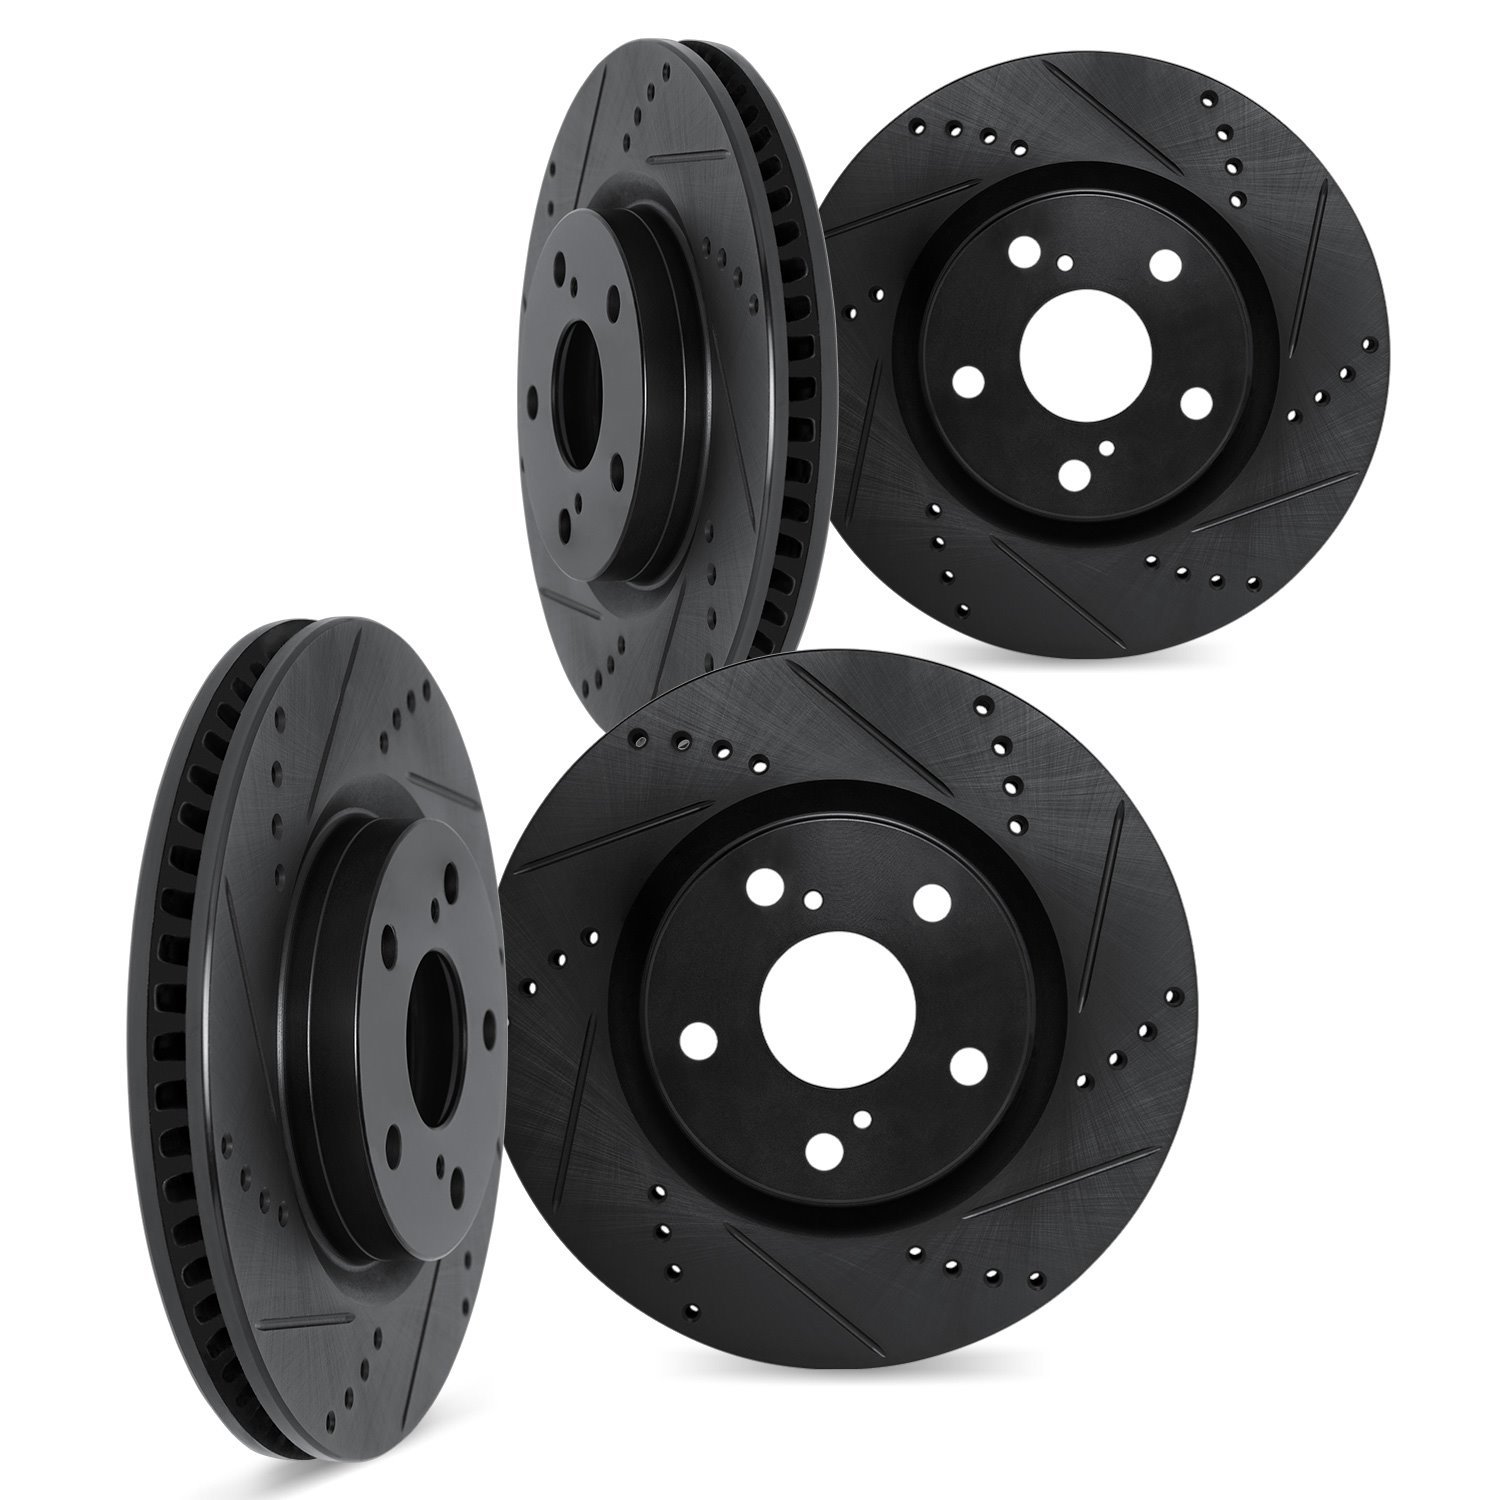 8004-74016 Drilled/Slotted Brake Rotors [Black], 2004-2006 Audi/Volkswagen, Position: Front and Rear